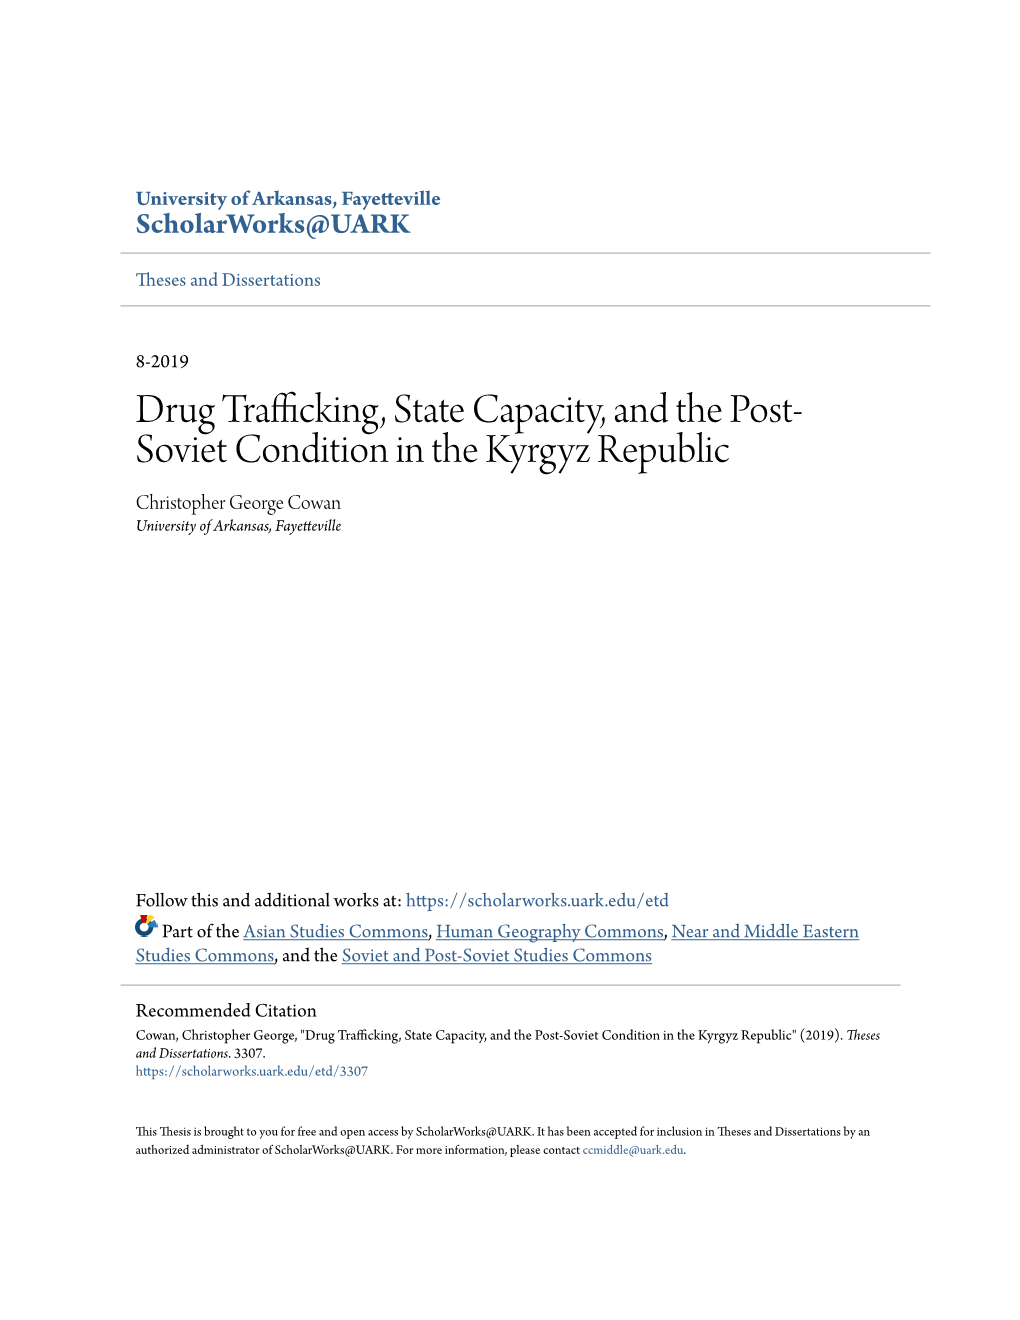 Drug Trafficking, State Capacity, and the Post-Soviet Condition in the Kyrgyz Republic" (2019)